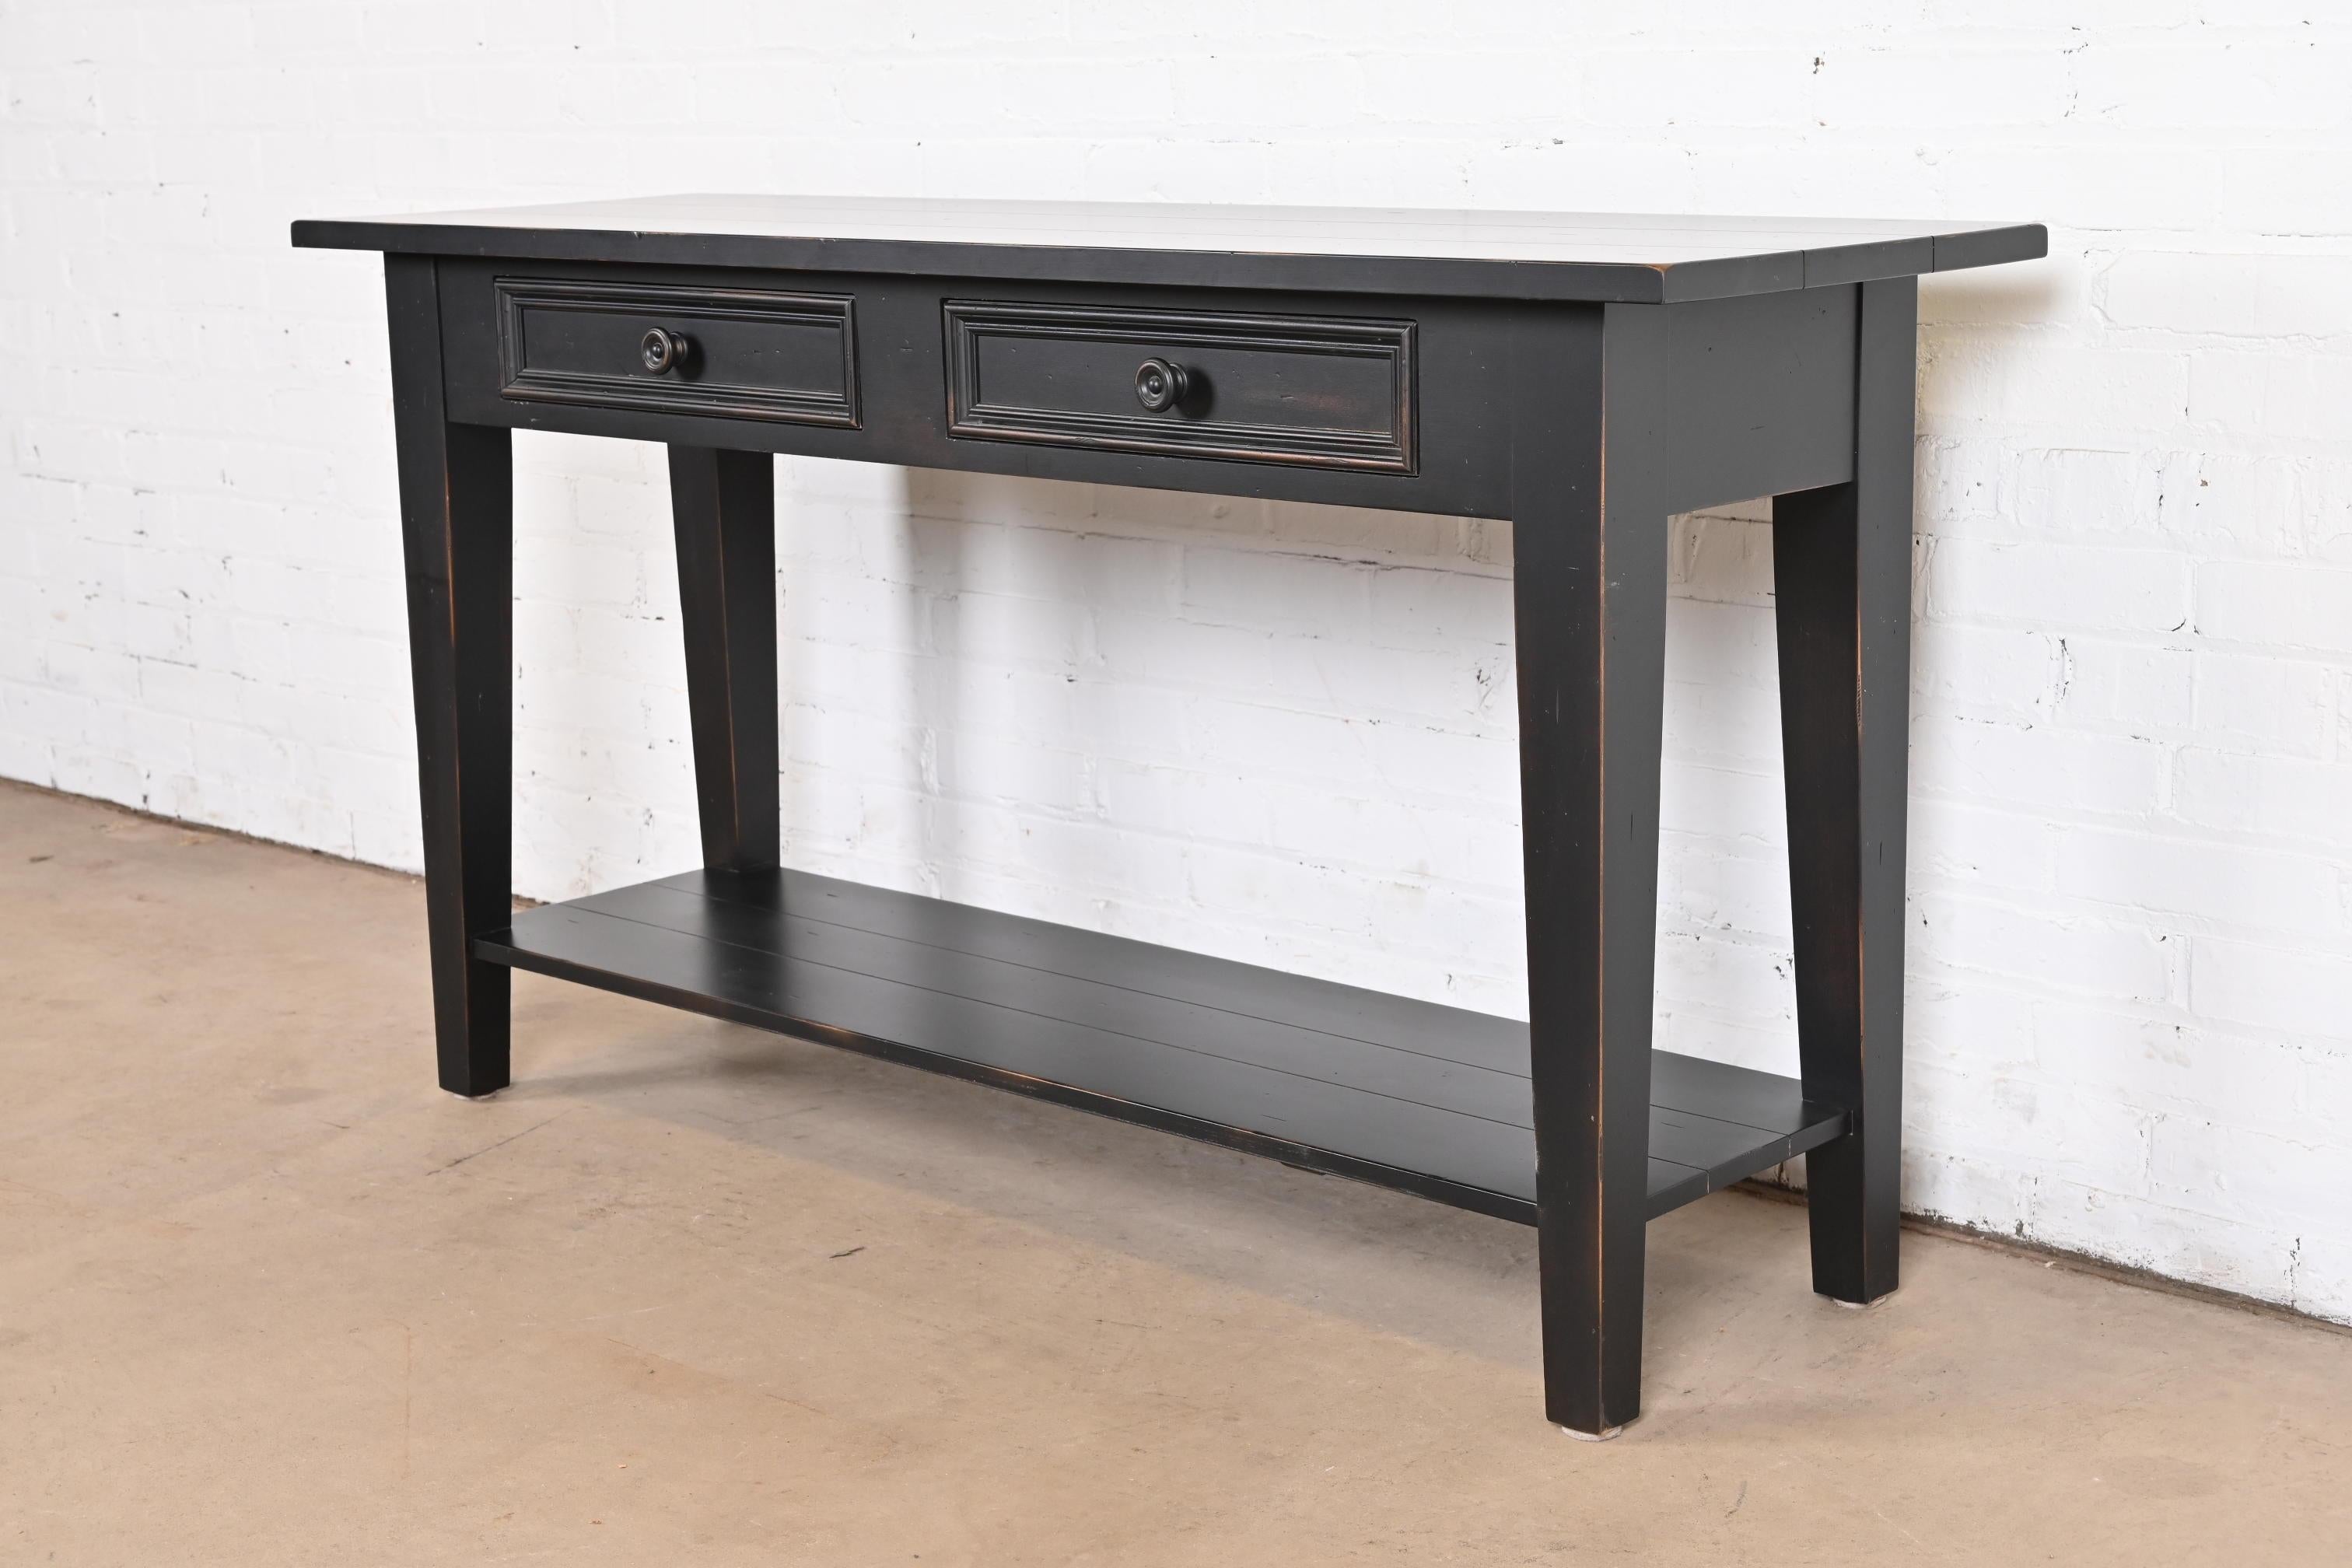 Shaker Style Ebonized Maple Sideboard Buffet Server or Console Table In Good Condition For Sale In South Bend, IN